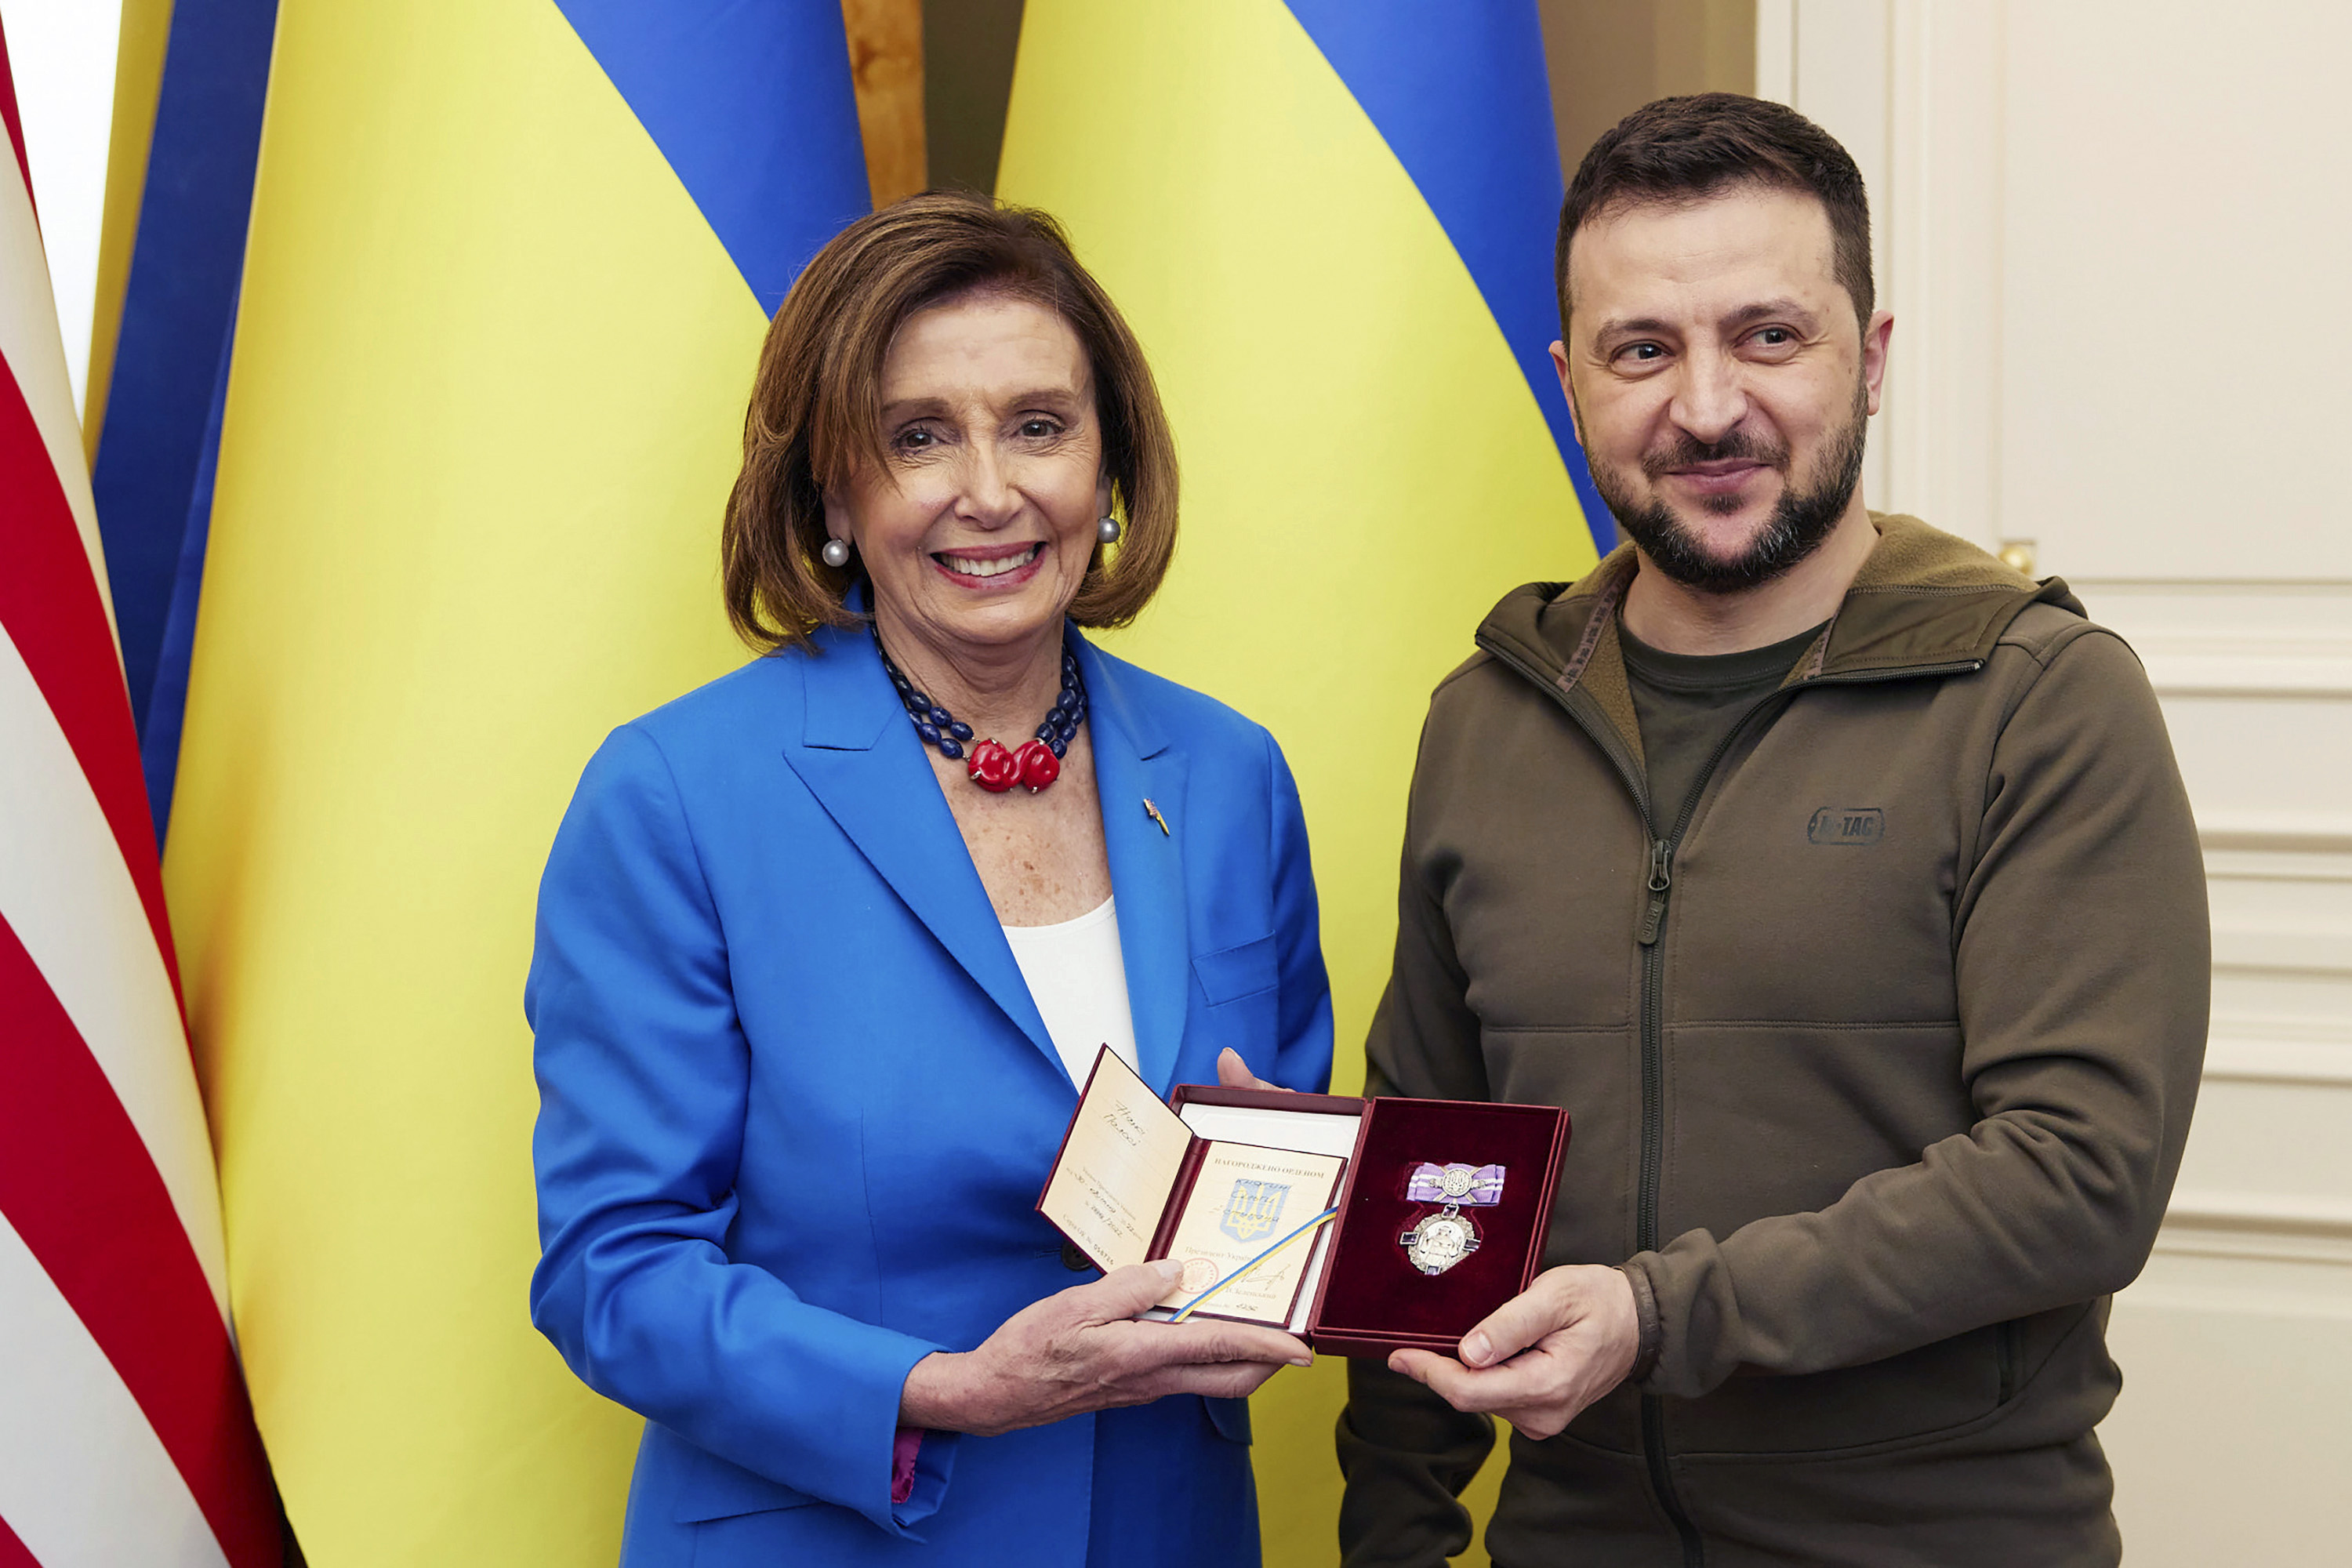 Zelensky awards the Order of Princess Olga to Pelosi for her "significant personal contribution" to strengthening Ukrainian and American ties.